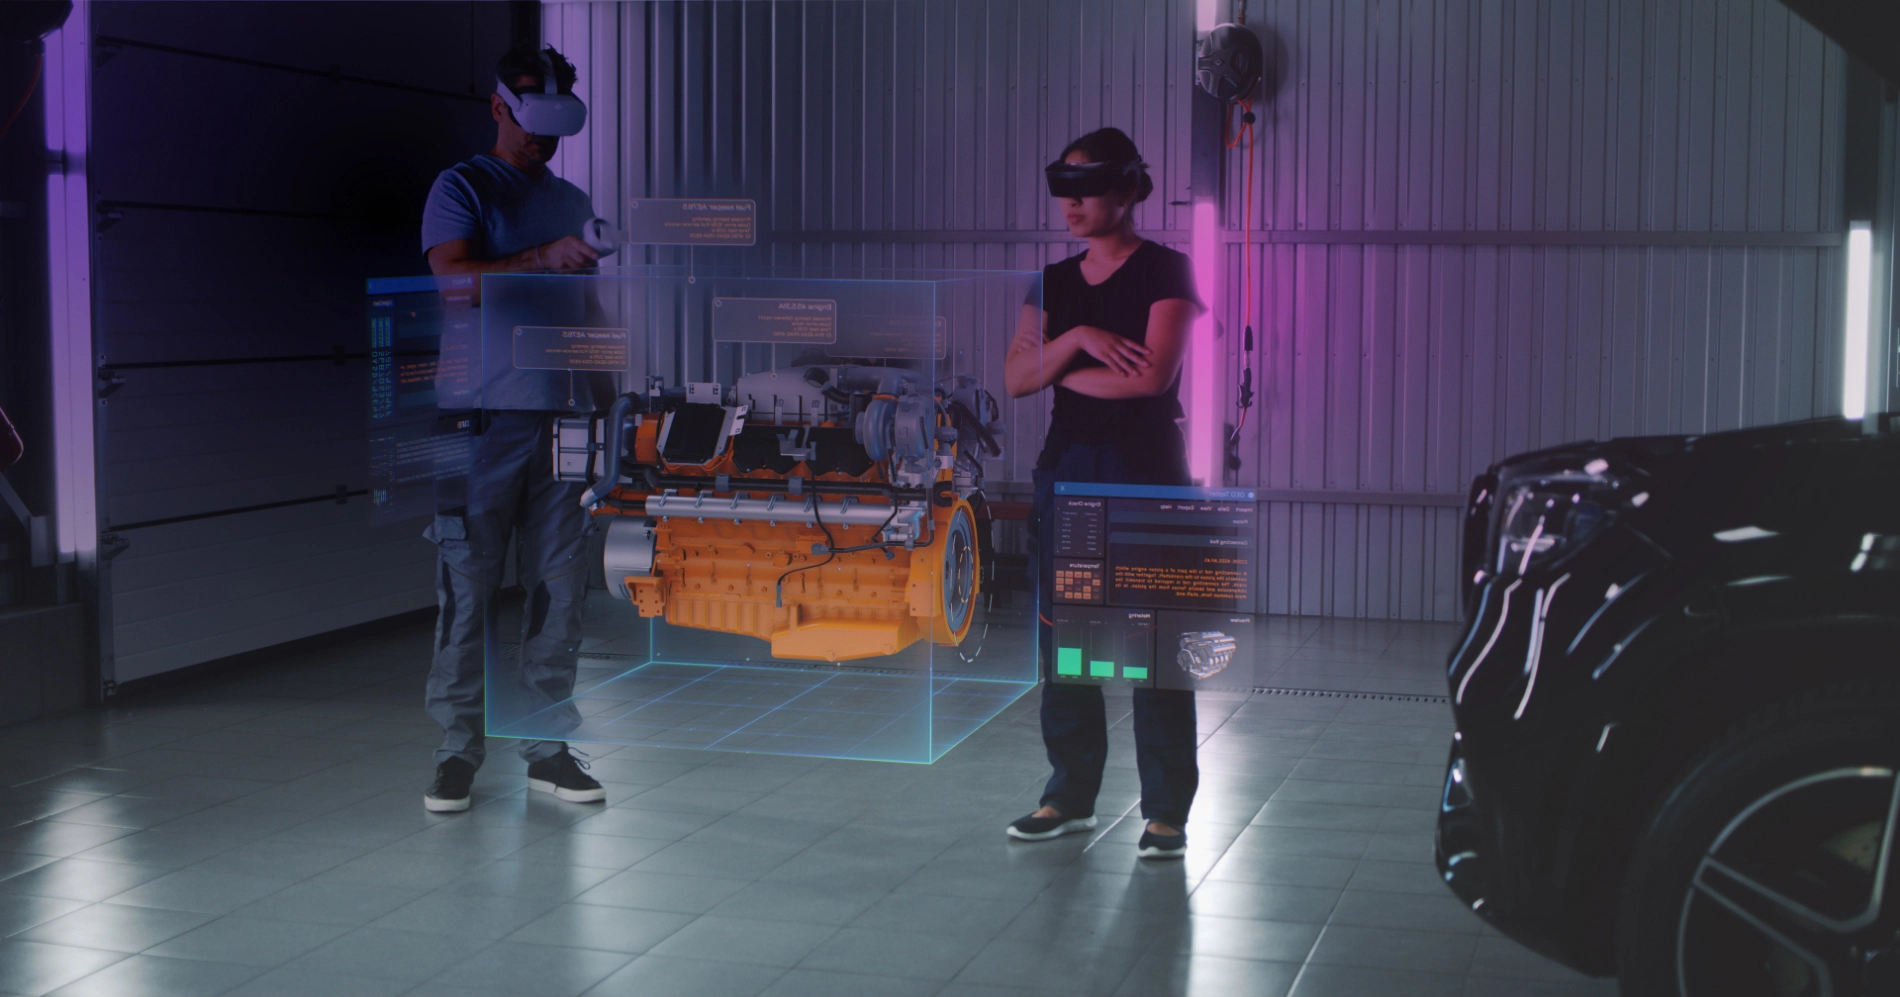 Image of people using virtual reality for training in an automotive setting